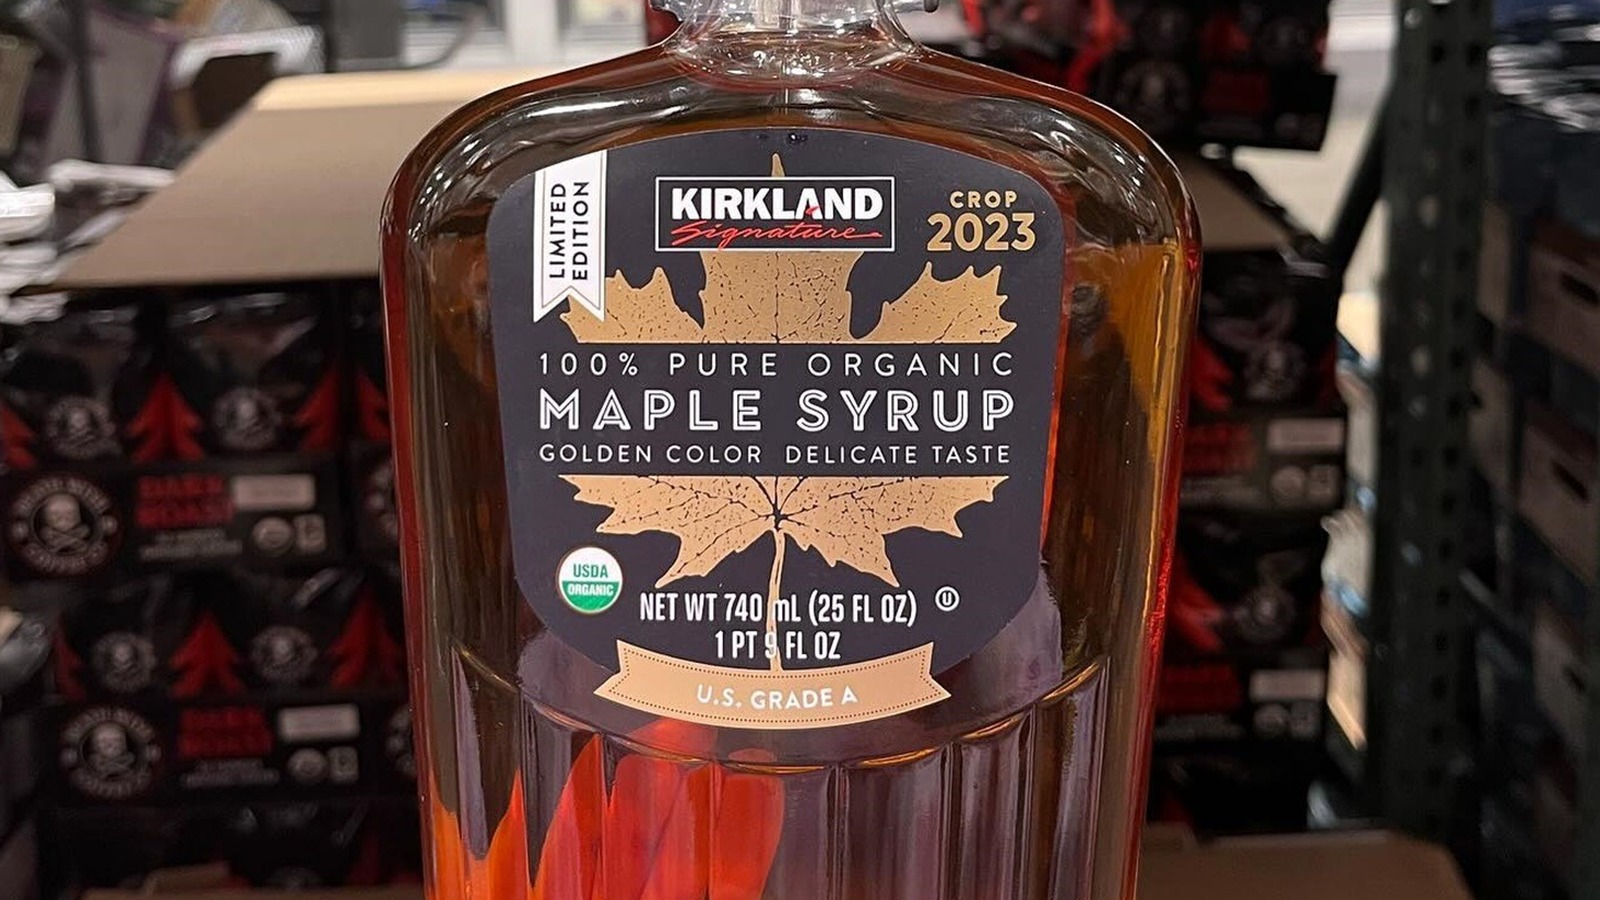 How Costco's Kirkland Golden Maple Syrup Compares to the Original